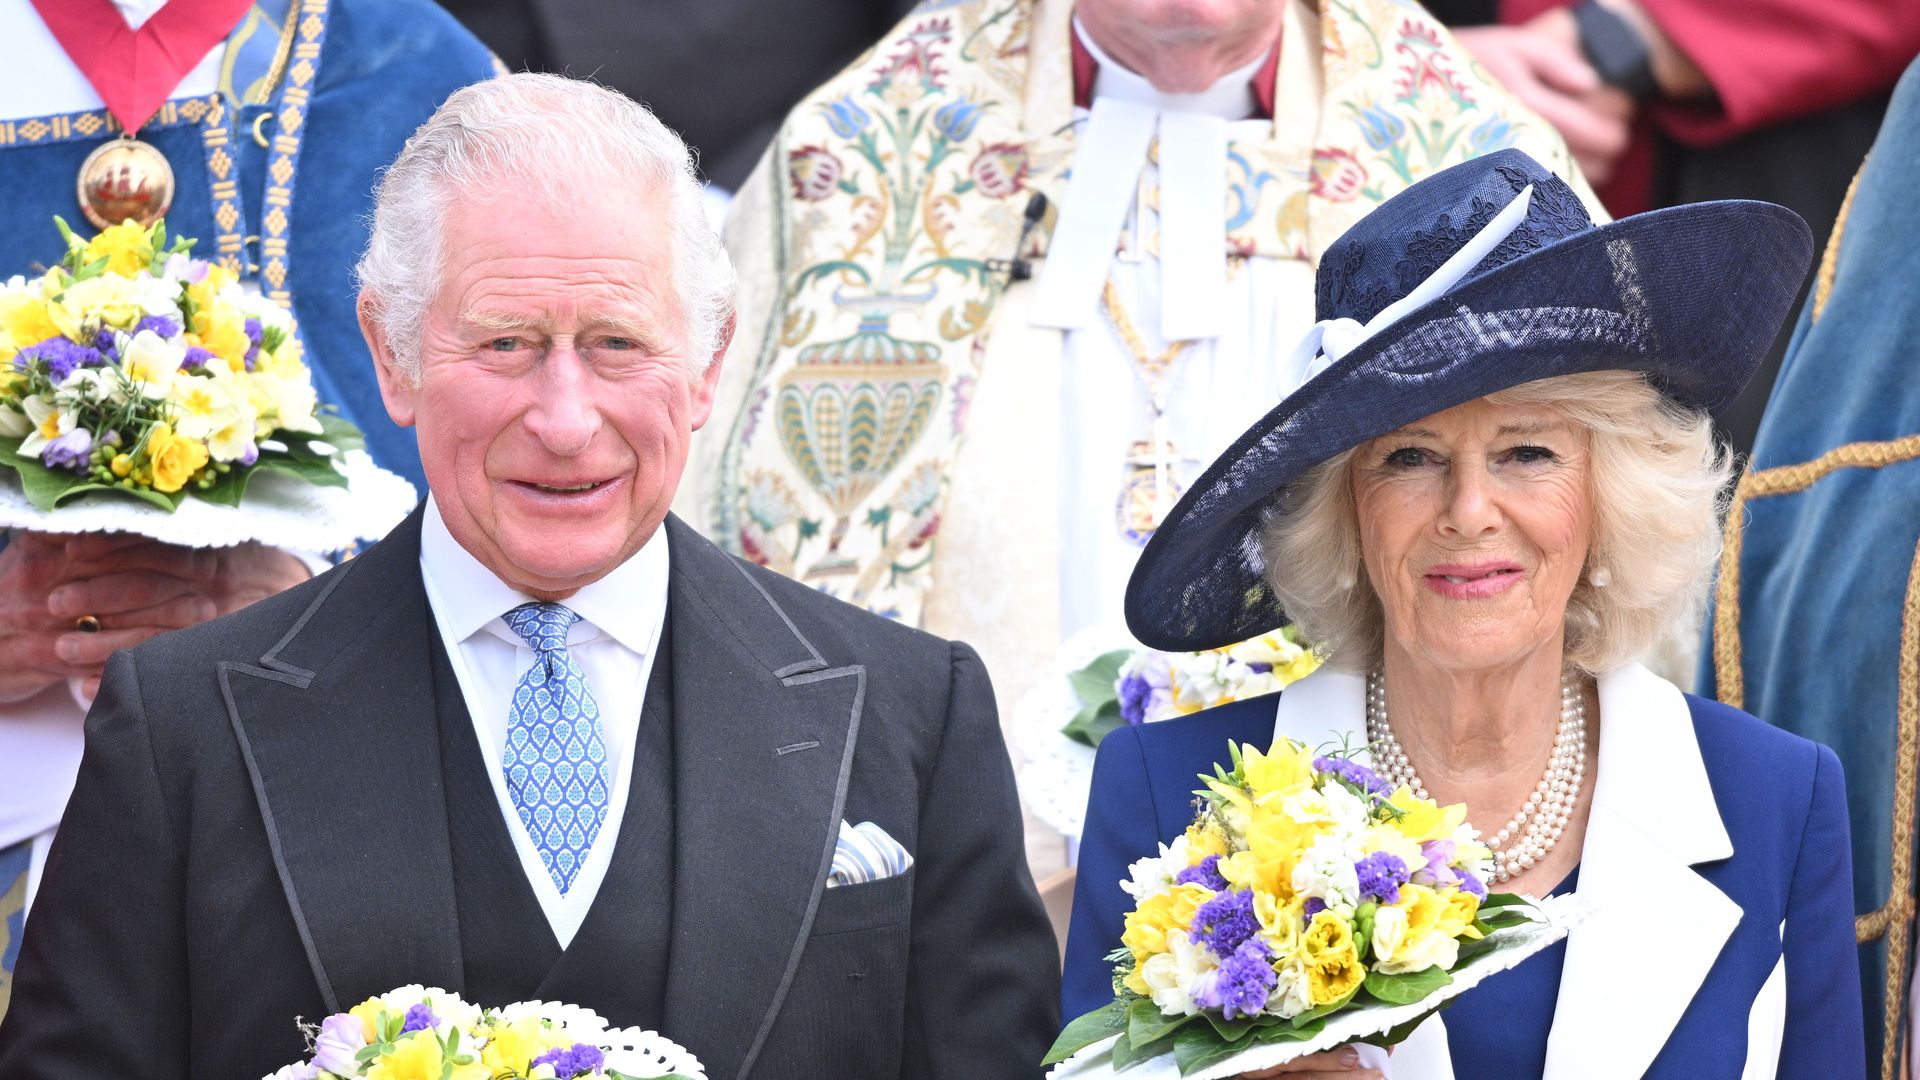 The King and Queen Consort attend the Royal Maundy service at York Minster